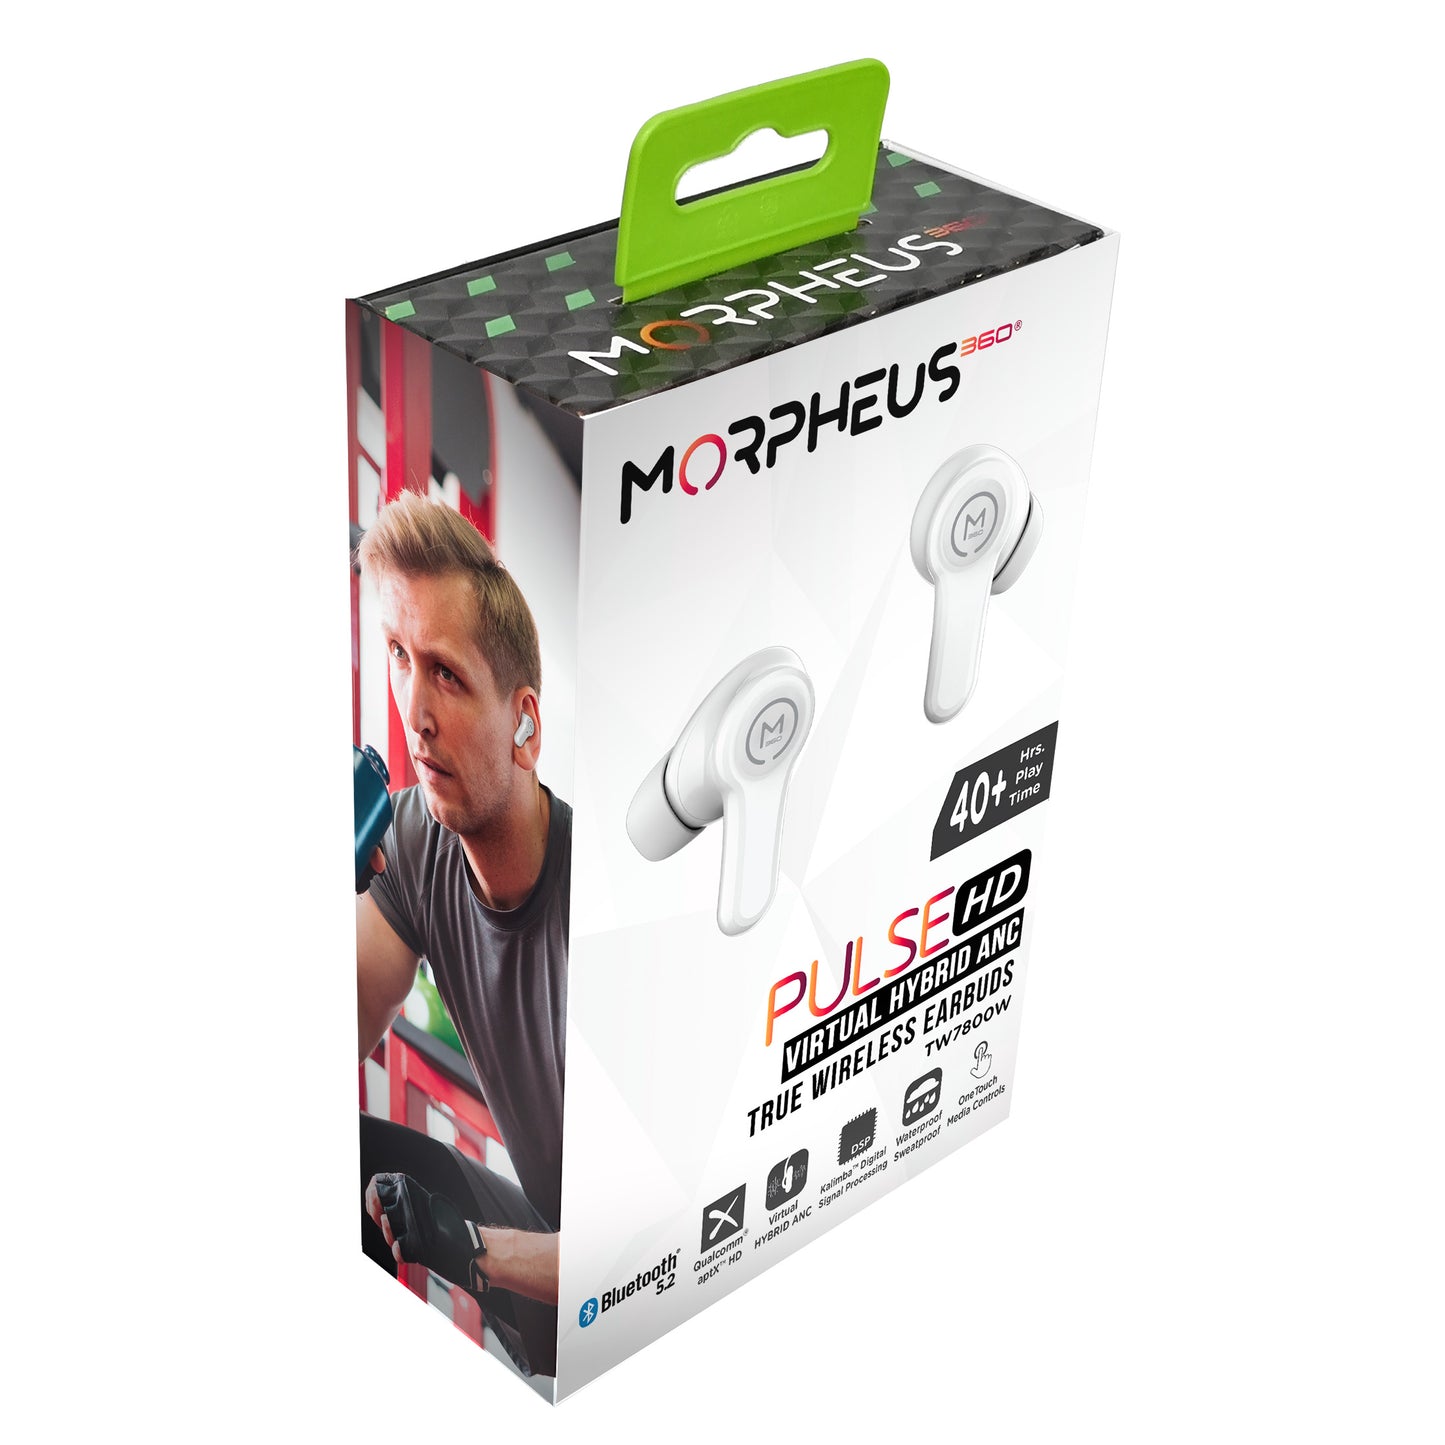 Photo of Morpheus 360 Pulse HD Virtual Hybrid ANC True Wireless Earbuds Retail Packaging. Retail package shows right and left white stick earbuds, 40+ Hours of Playtime, Bluetooth 5.2, Qualcom aptX HD, Virtual Hybrid ANC, Kalimba Digital Signal Processing, Waterproof/Sweatproof, One Touch Media Controls.